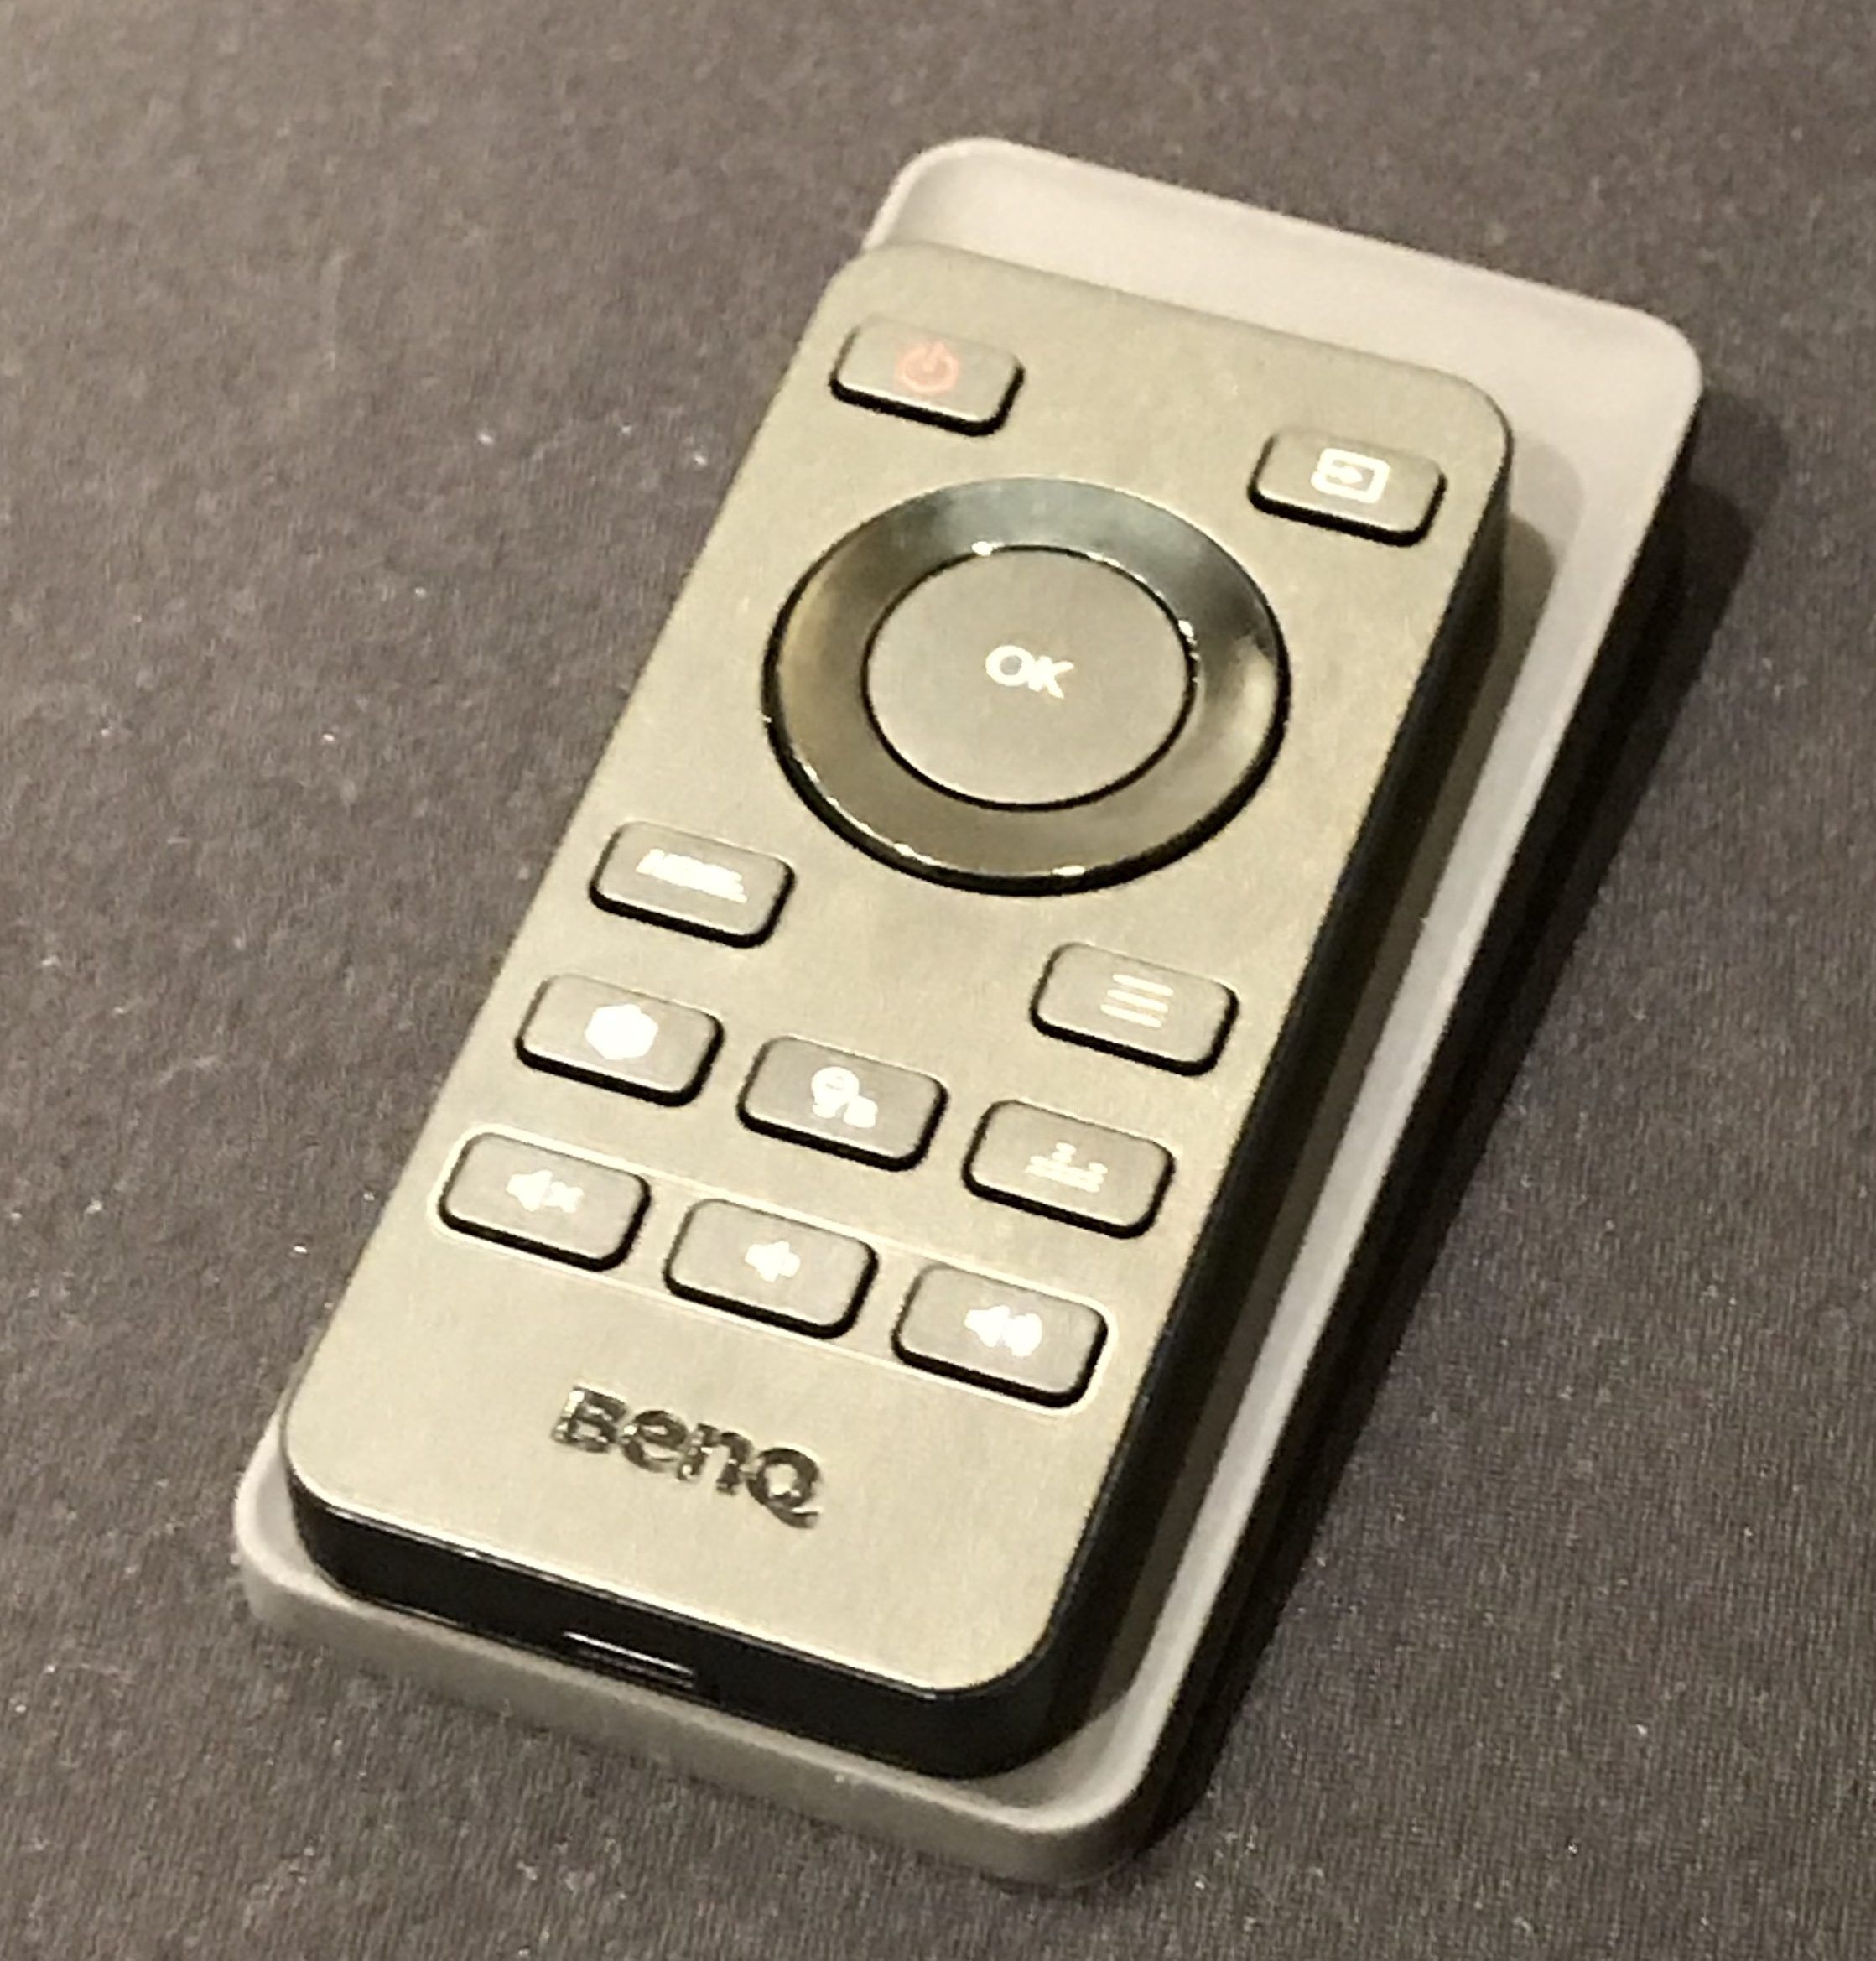 BenQ remote control for 32-inch Entertainment Monitor